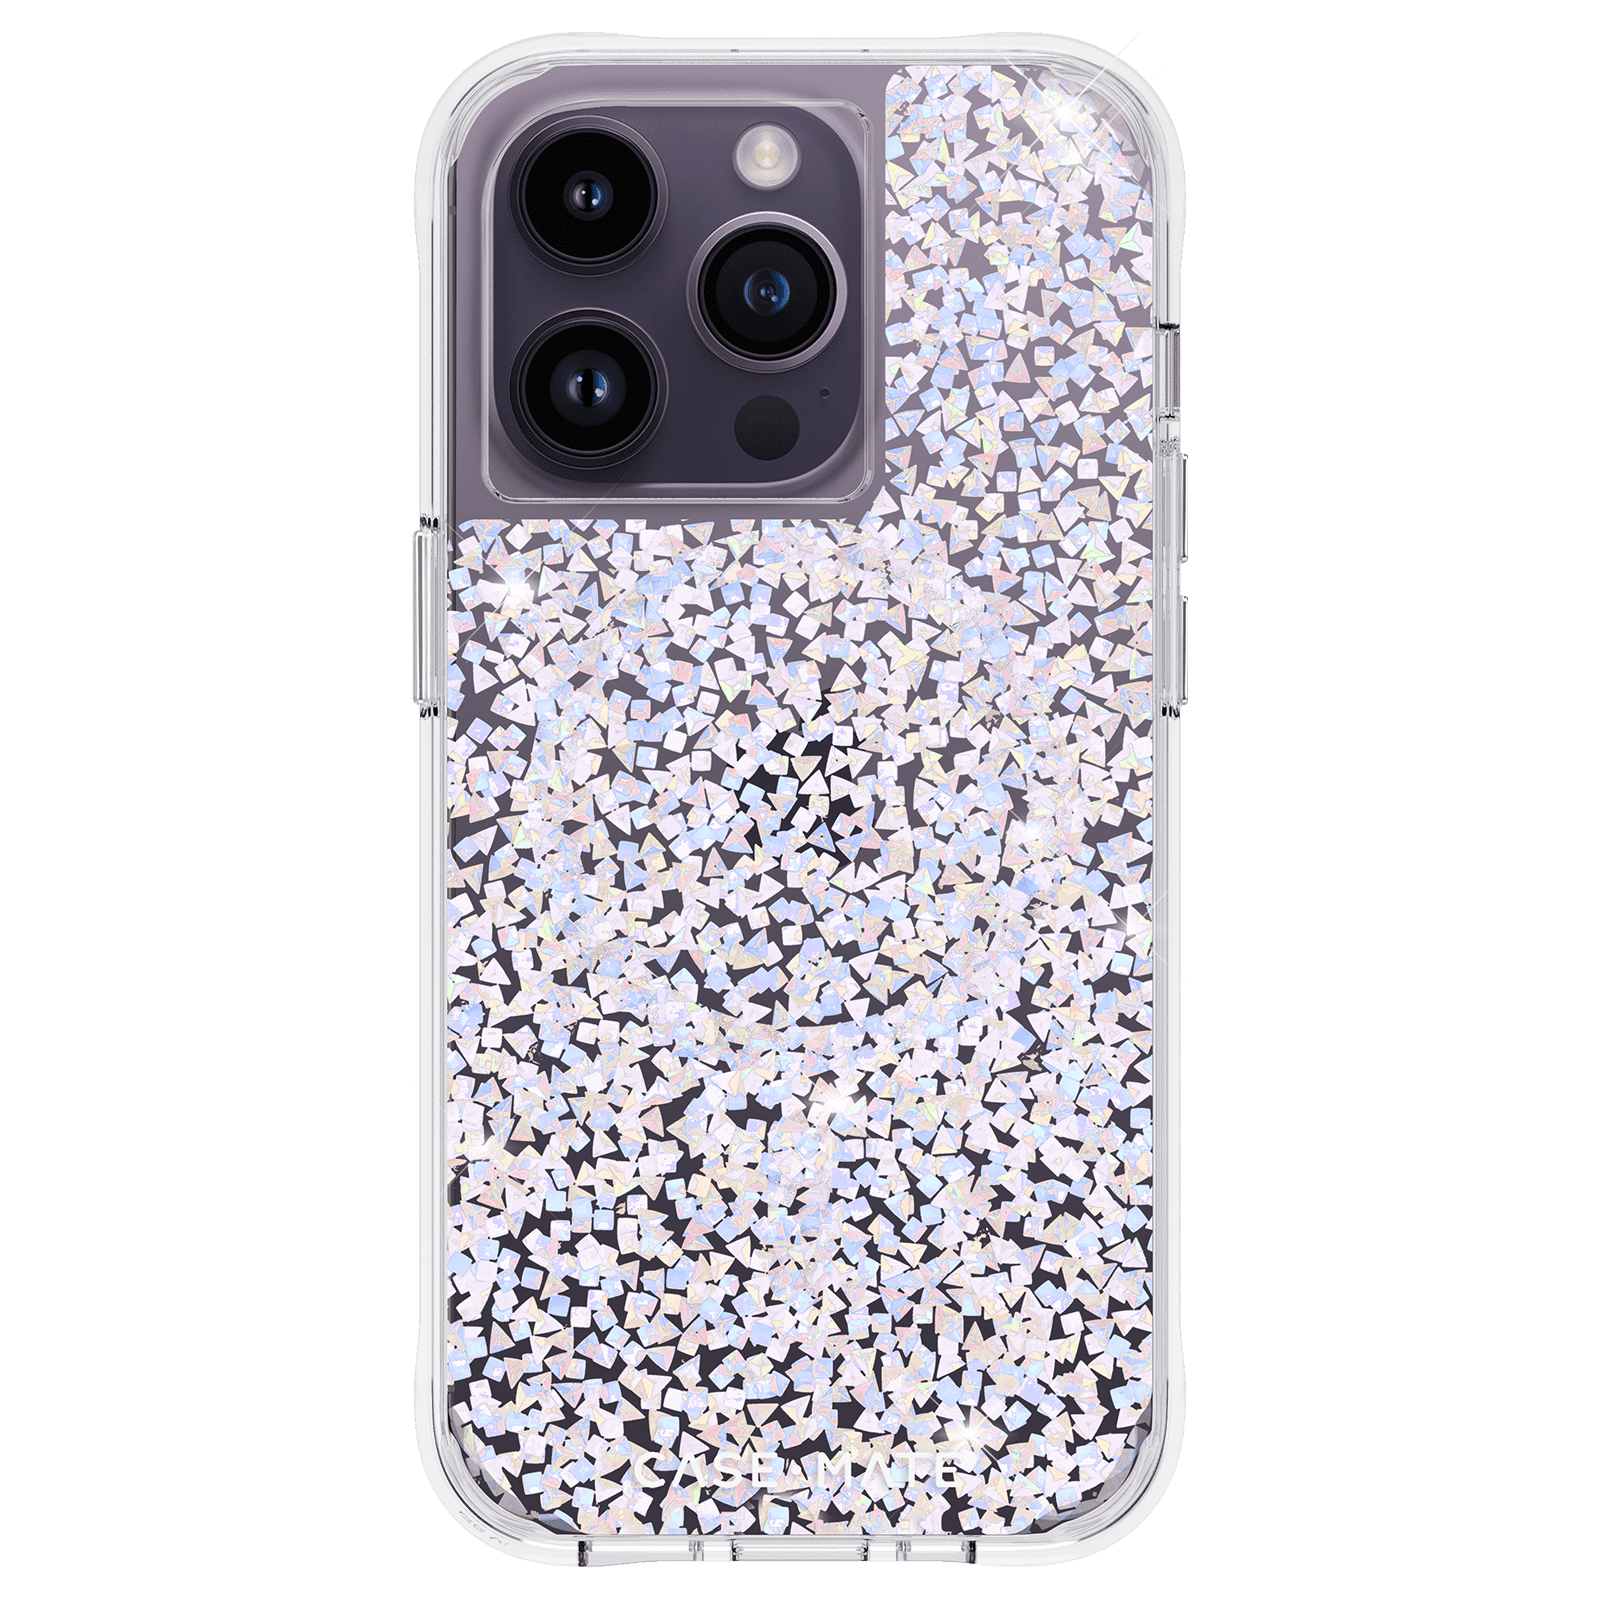 Here is Every iPhone 14 and iPhone 14 Pro Case That Launched Today